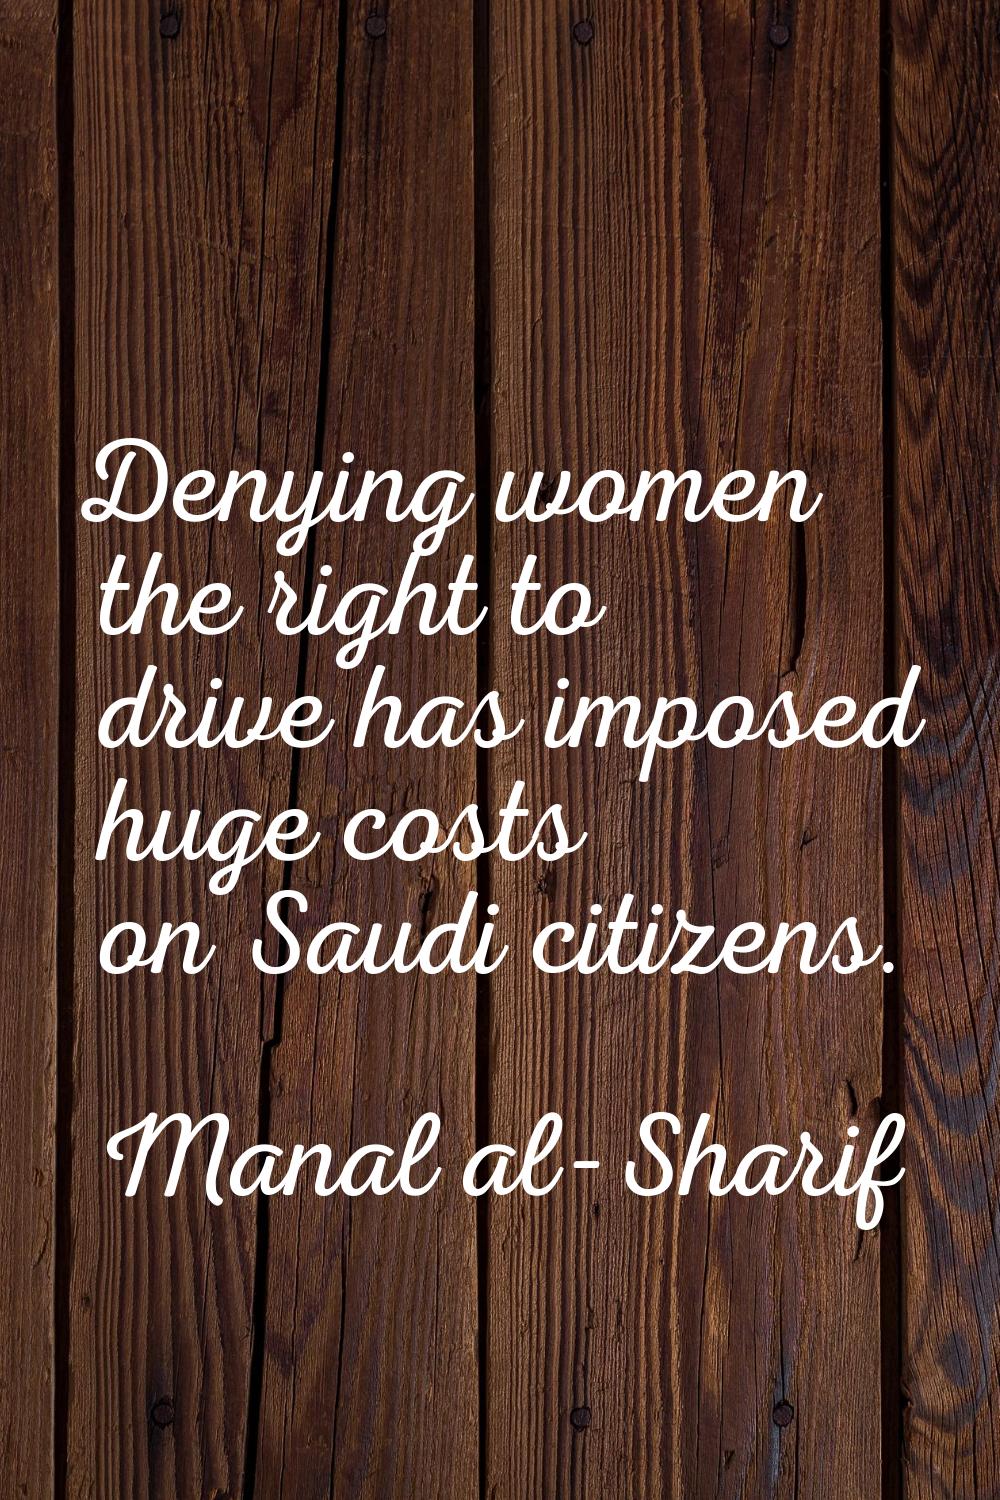 Denying women the right to drive has imposed huge costs on Saudi citizens.